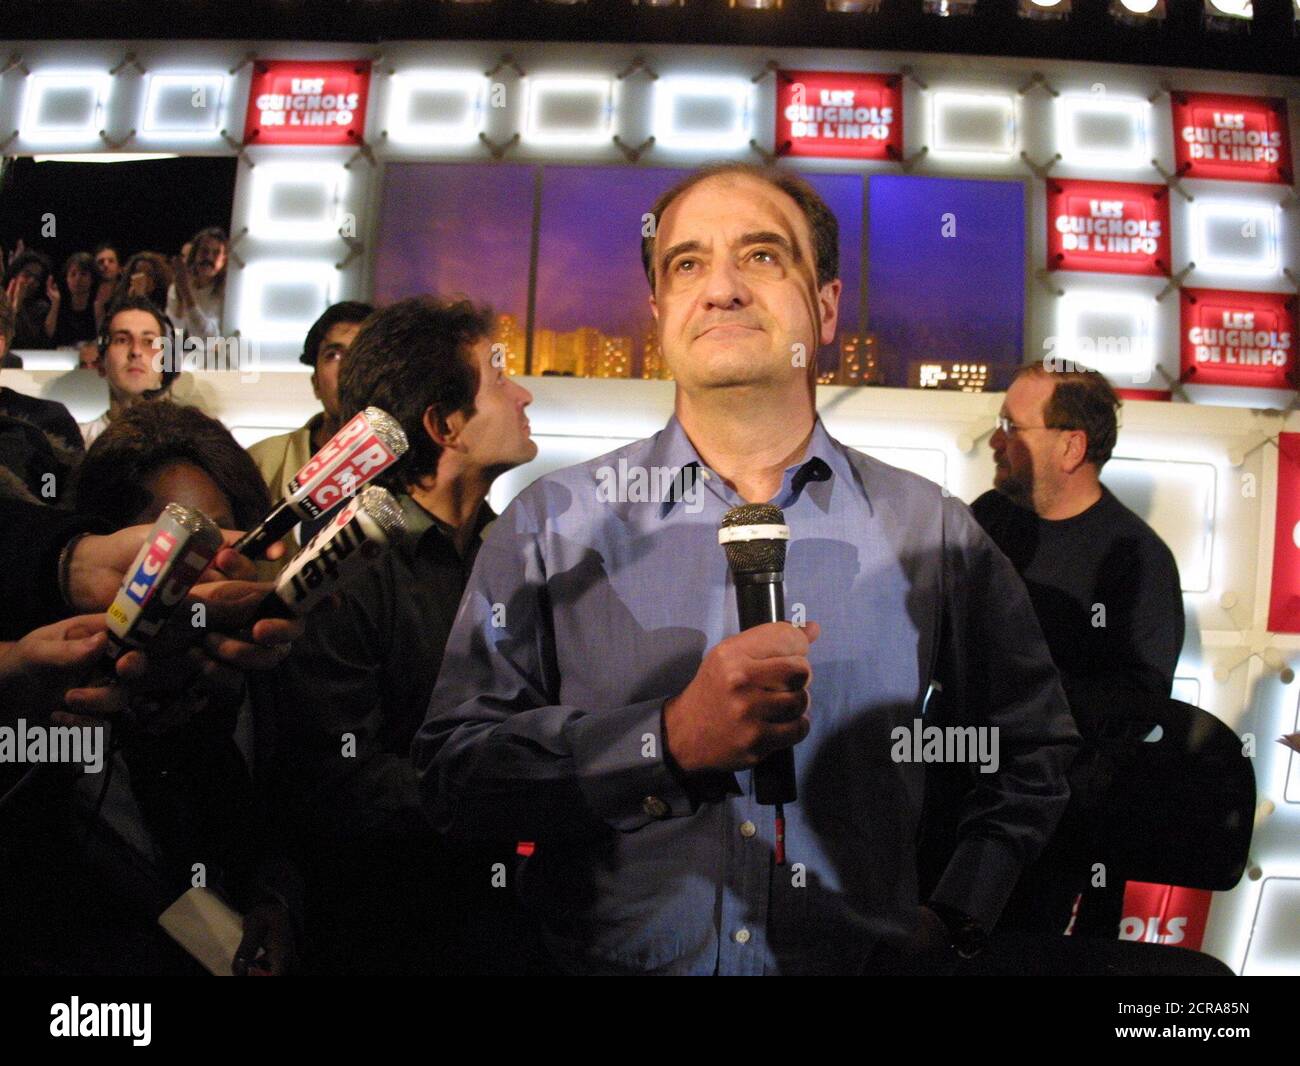 Pierre Lescure (C) speaks to staff after being sacked at the French pay-TV station Canal Plus in Paris, April 16, 2002. Earlier Jean-Marie Messier, the CEO of Vivendi Universal and owner of Vivendi's Canal Plus pay TV unit, announced that top executive Lescure had resigned his post and would be replaced by TF1 television group senior executive Xavier Couture. Union representative at Canal Plus denounced the dumping of popular station chief Lescure. REUTERS/Mousse  JES Stock Photo